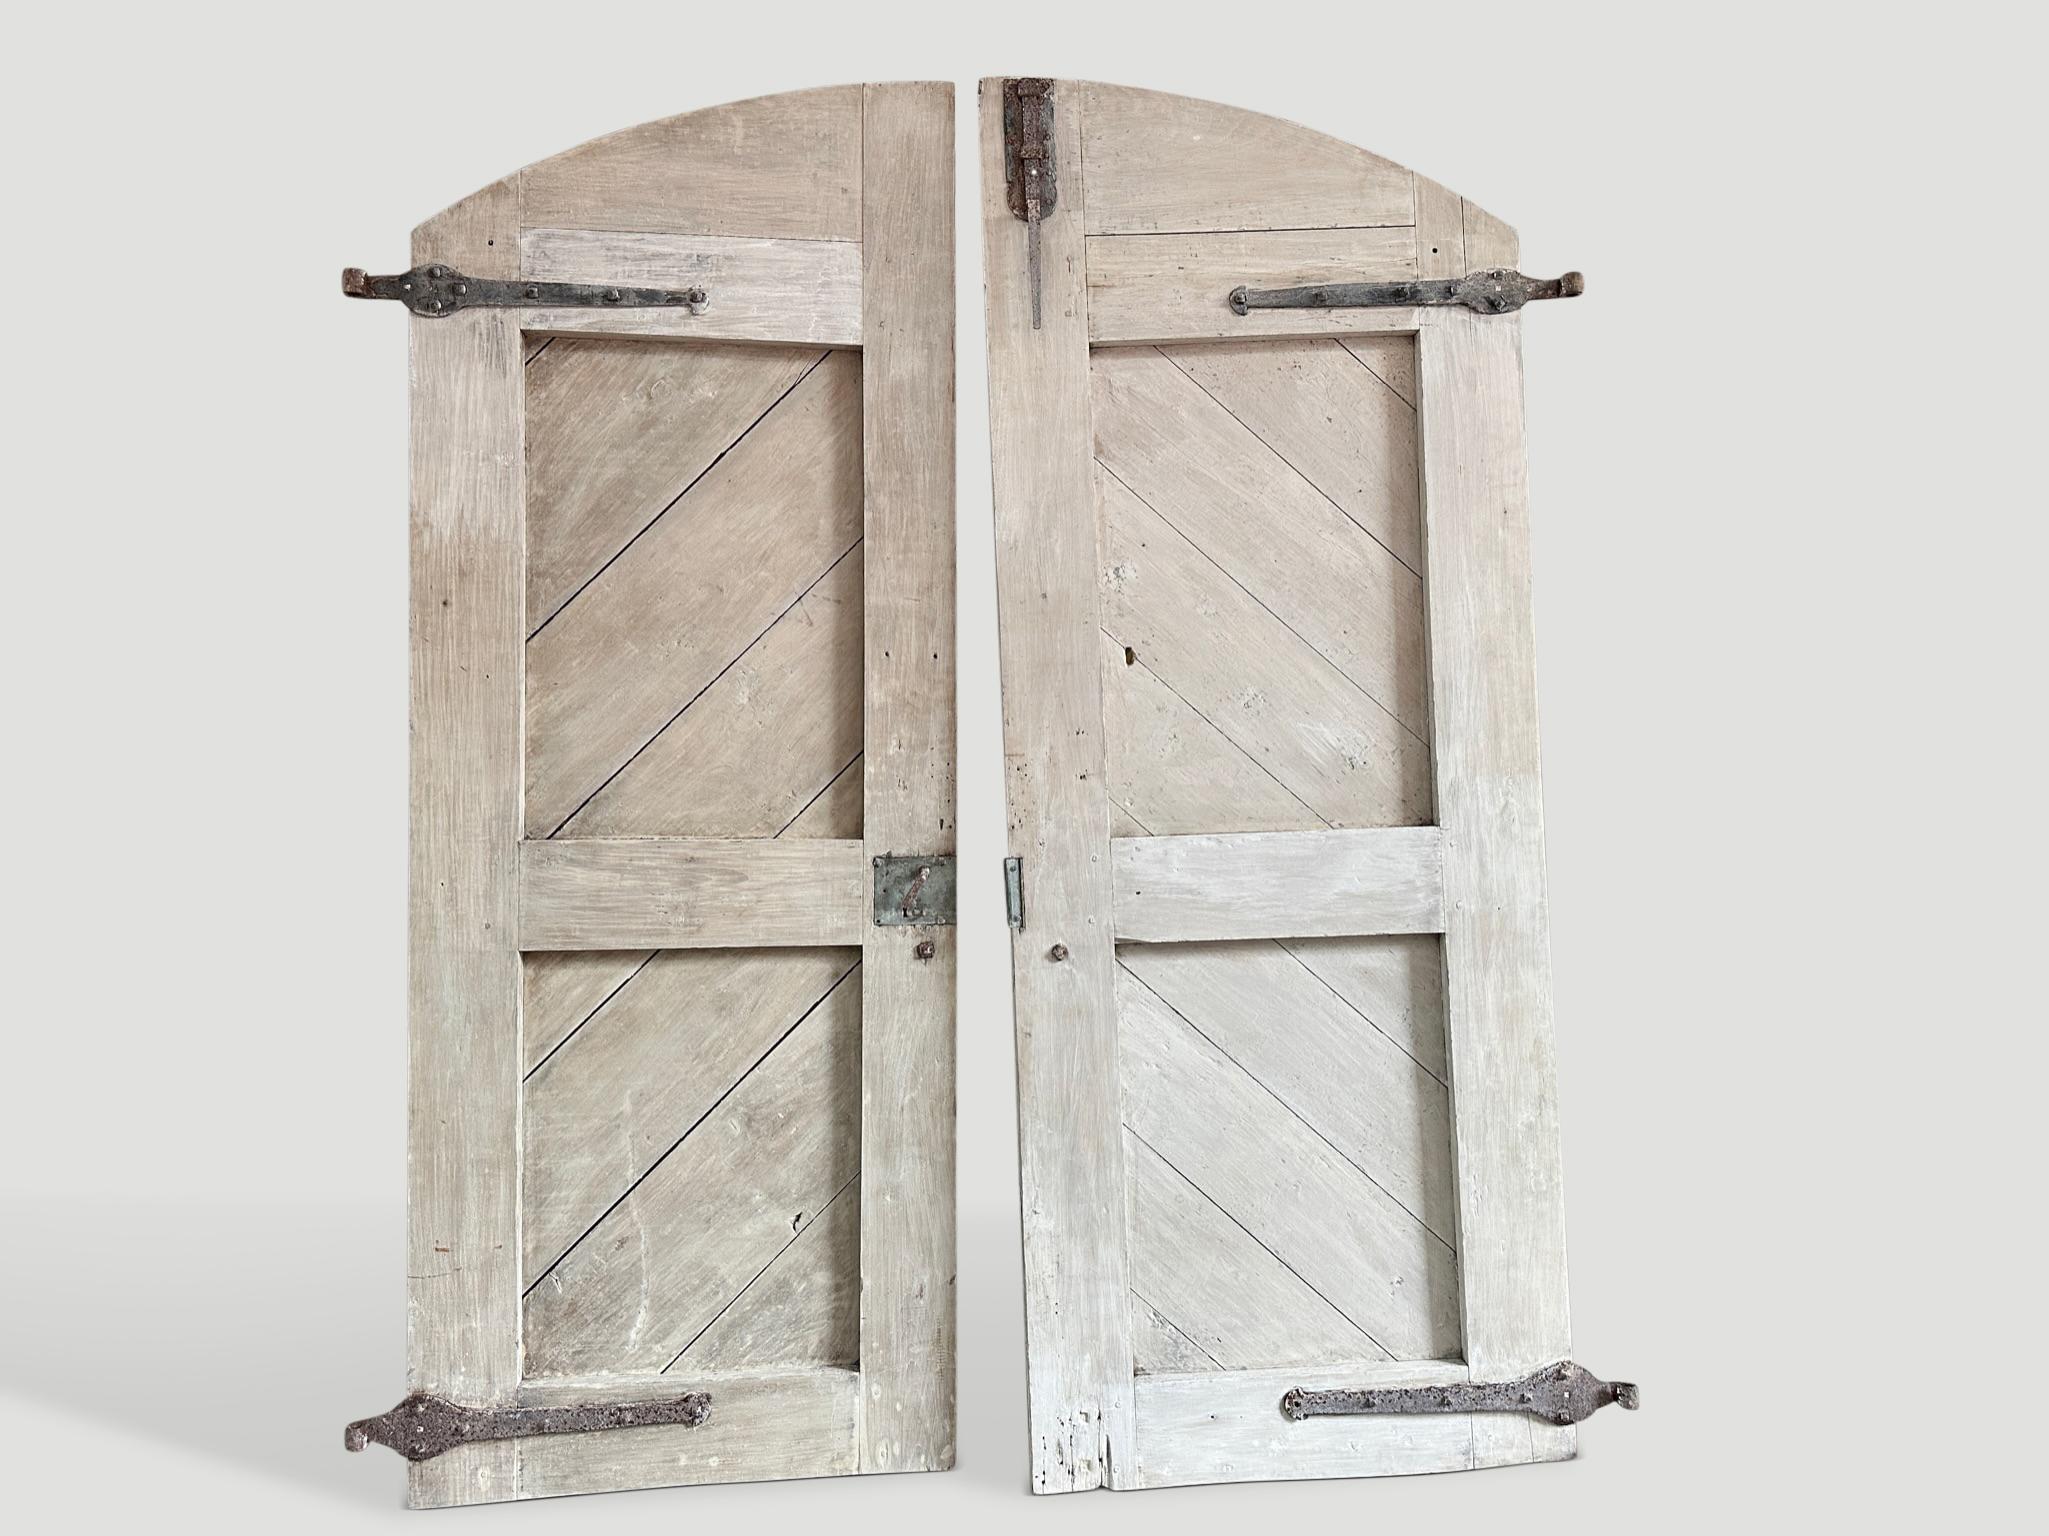 Beautiful teak wooden doors, retaining their original hardware. Installed as doors, hung on the wall as art, as a head board or dining table. A multitude of uses for this set of rare doors. We bleached the wood and then added a light white wash